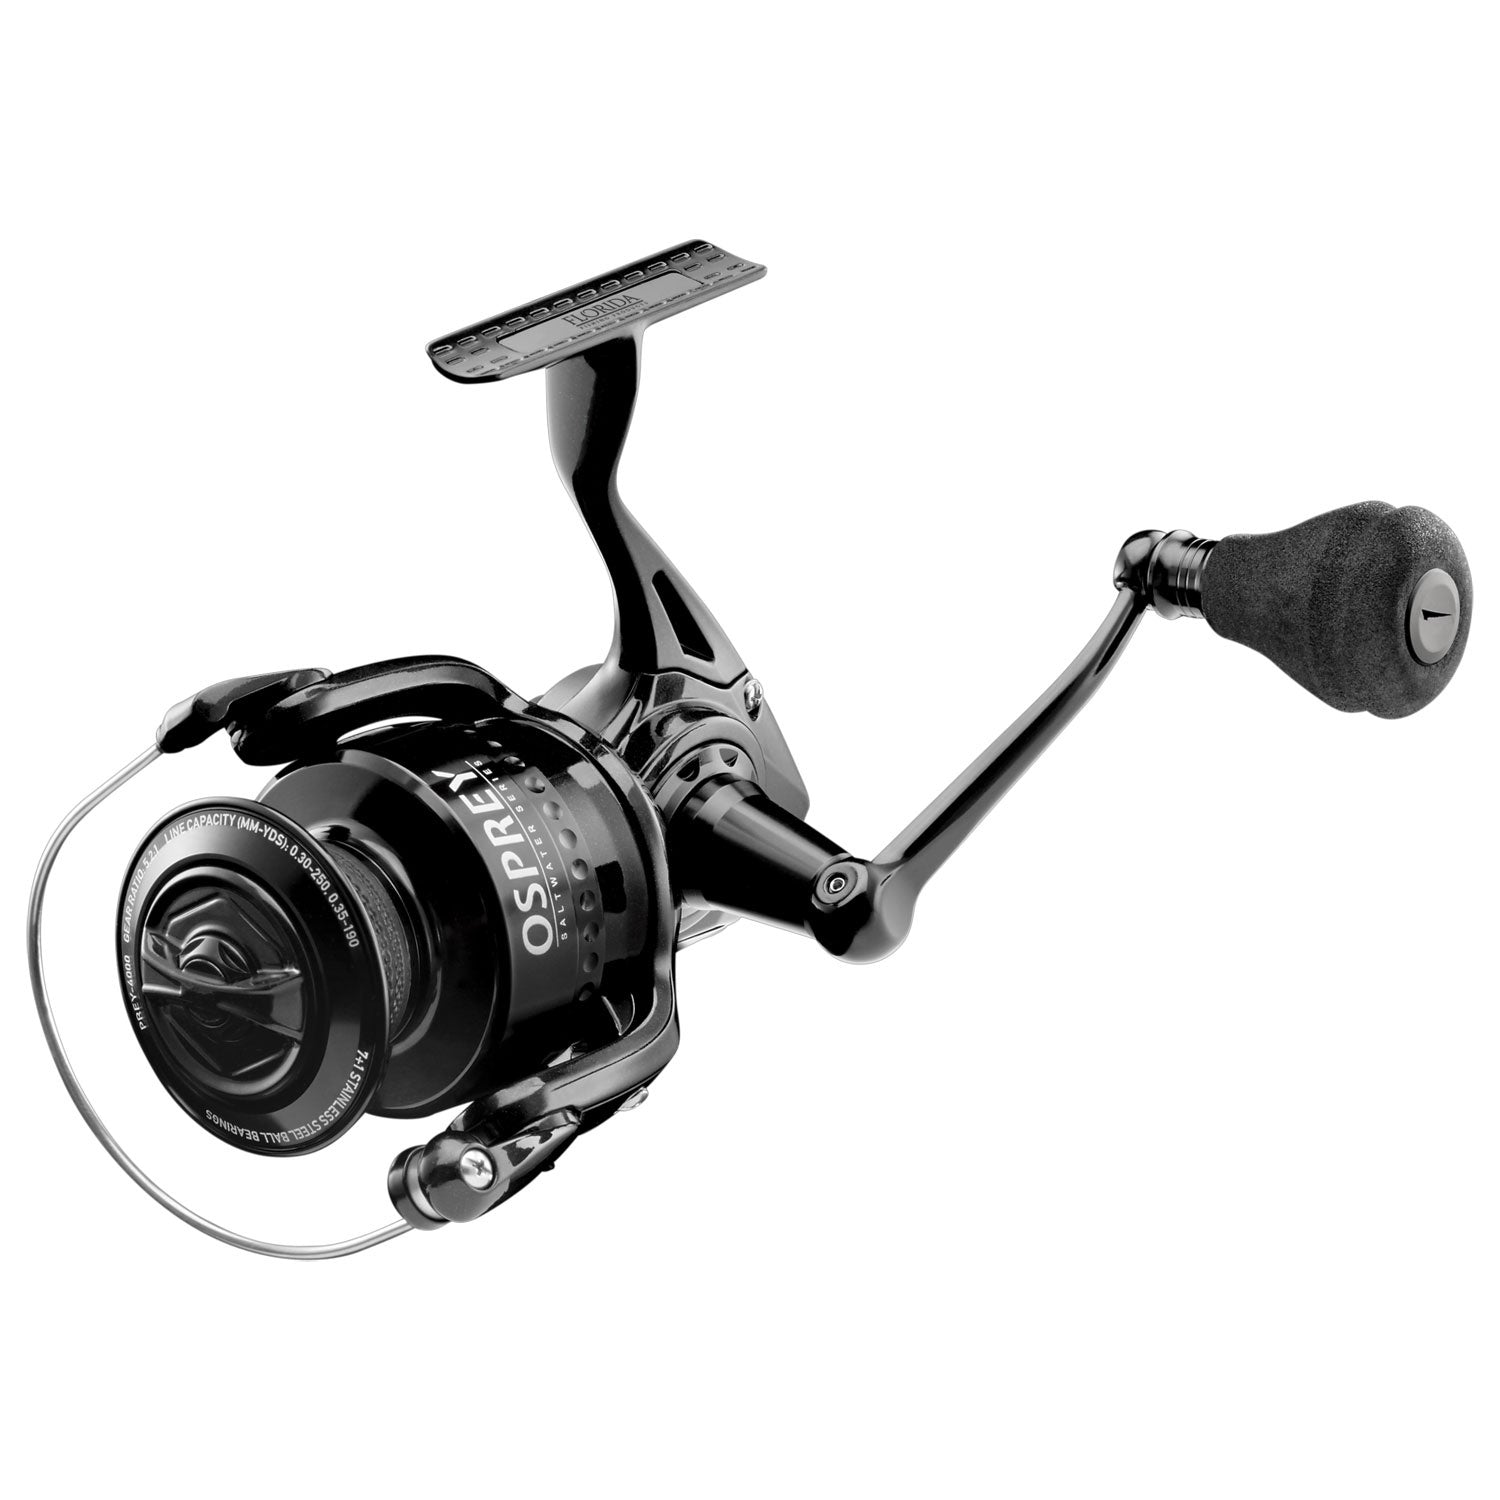 Florida Fishing Products Osprey 4000 Saltwater Series Spinning Reel